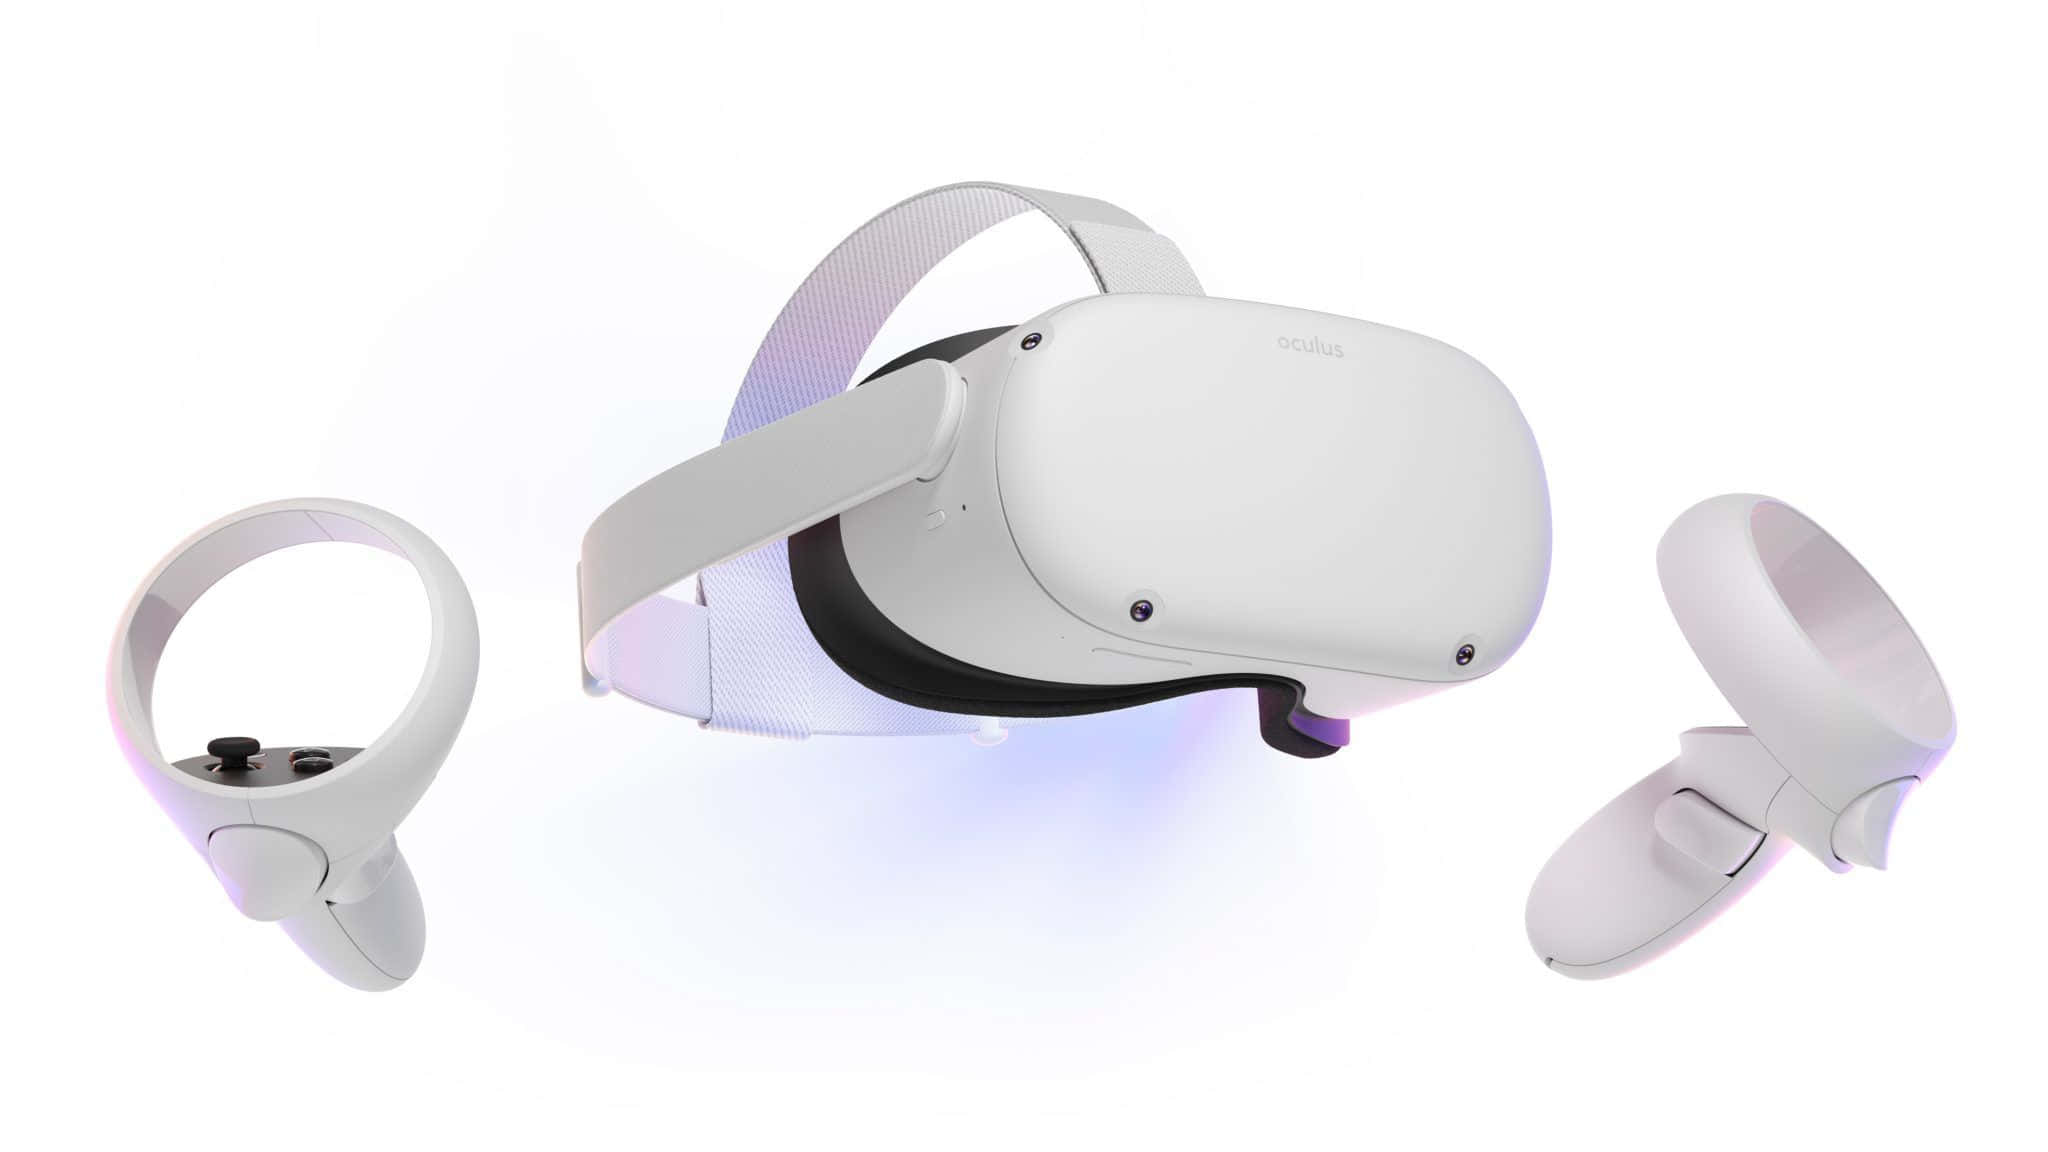 "Stay connected to your virtual world with the Oculus Quest 2"